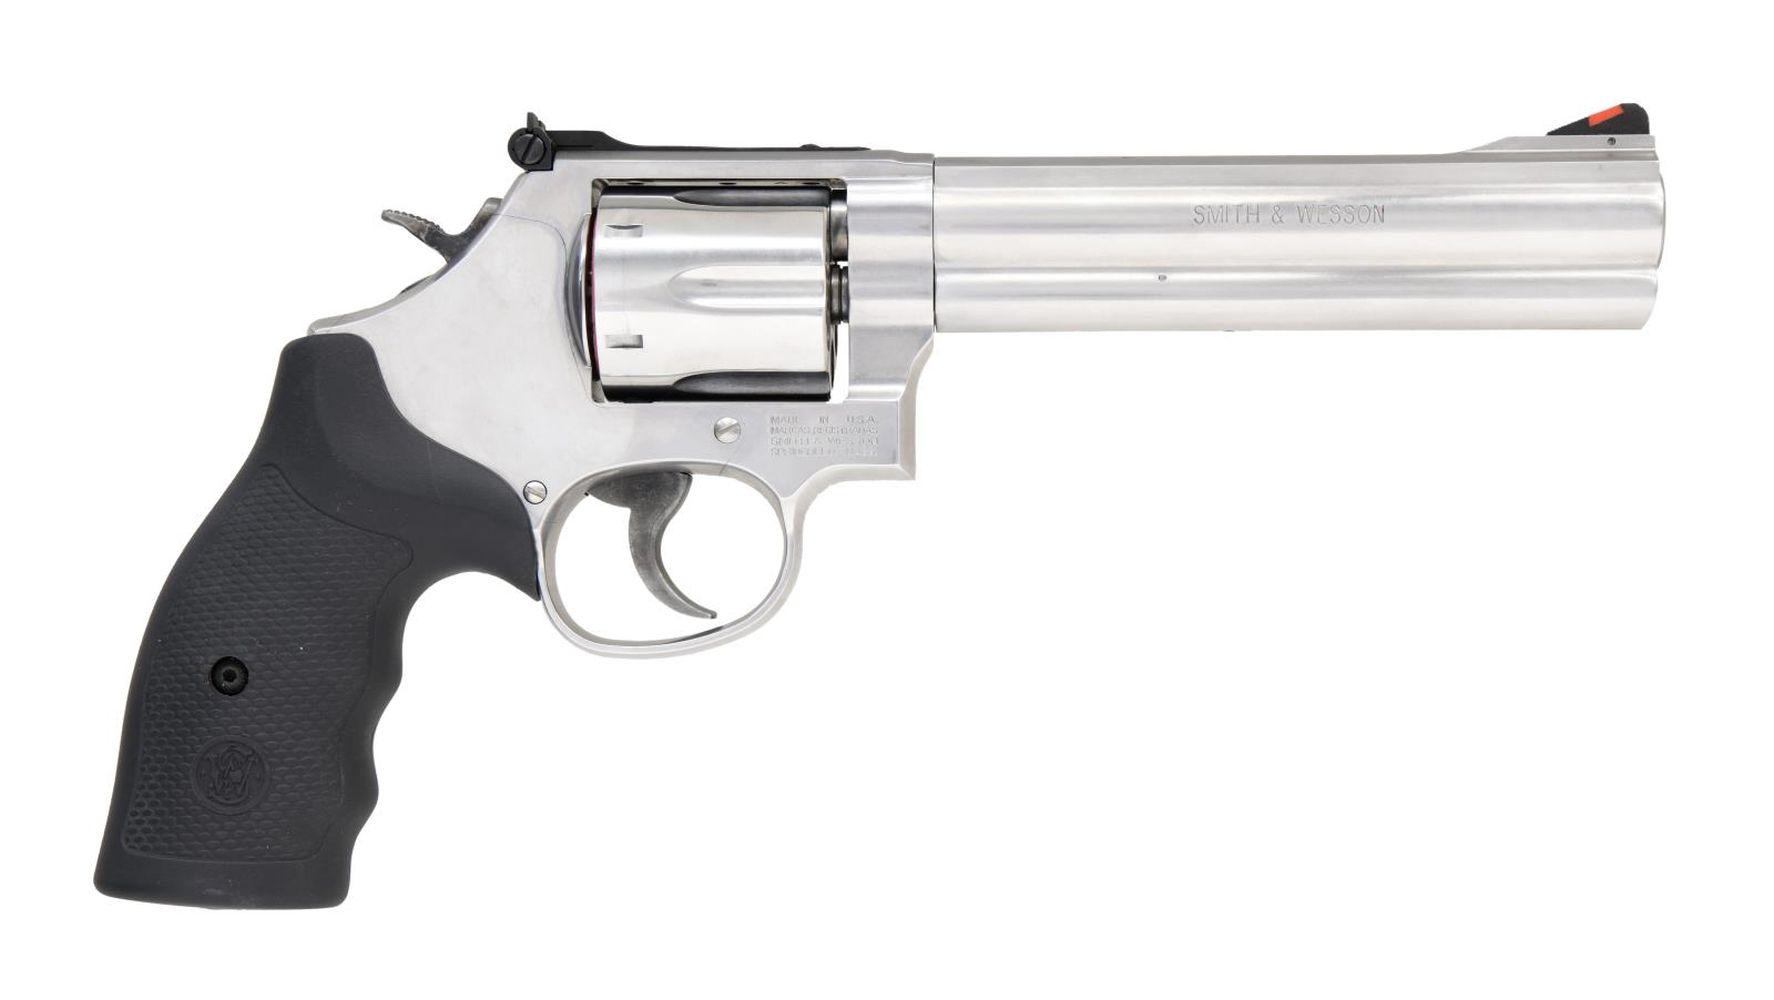 SMITH & WESSON MODEL 686-6 DOUBLE ACTION REVOLVER